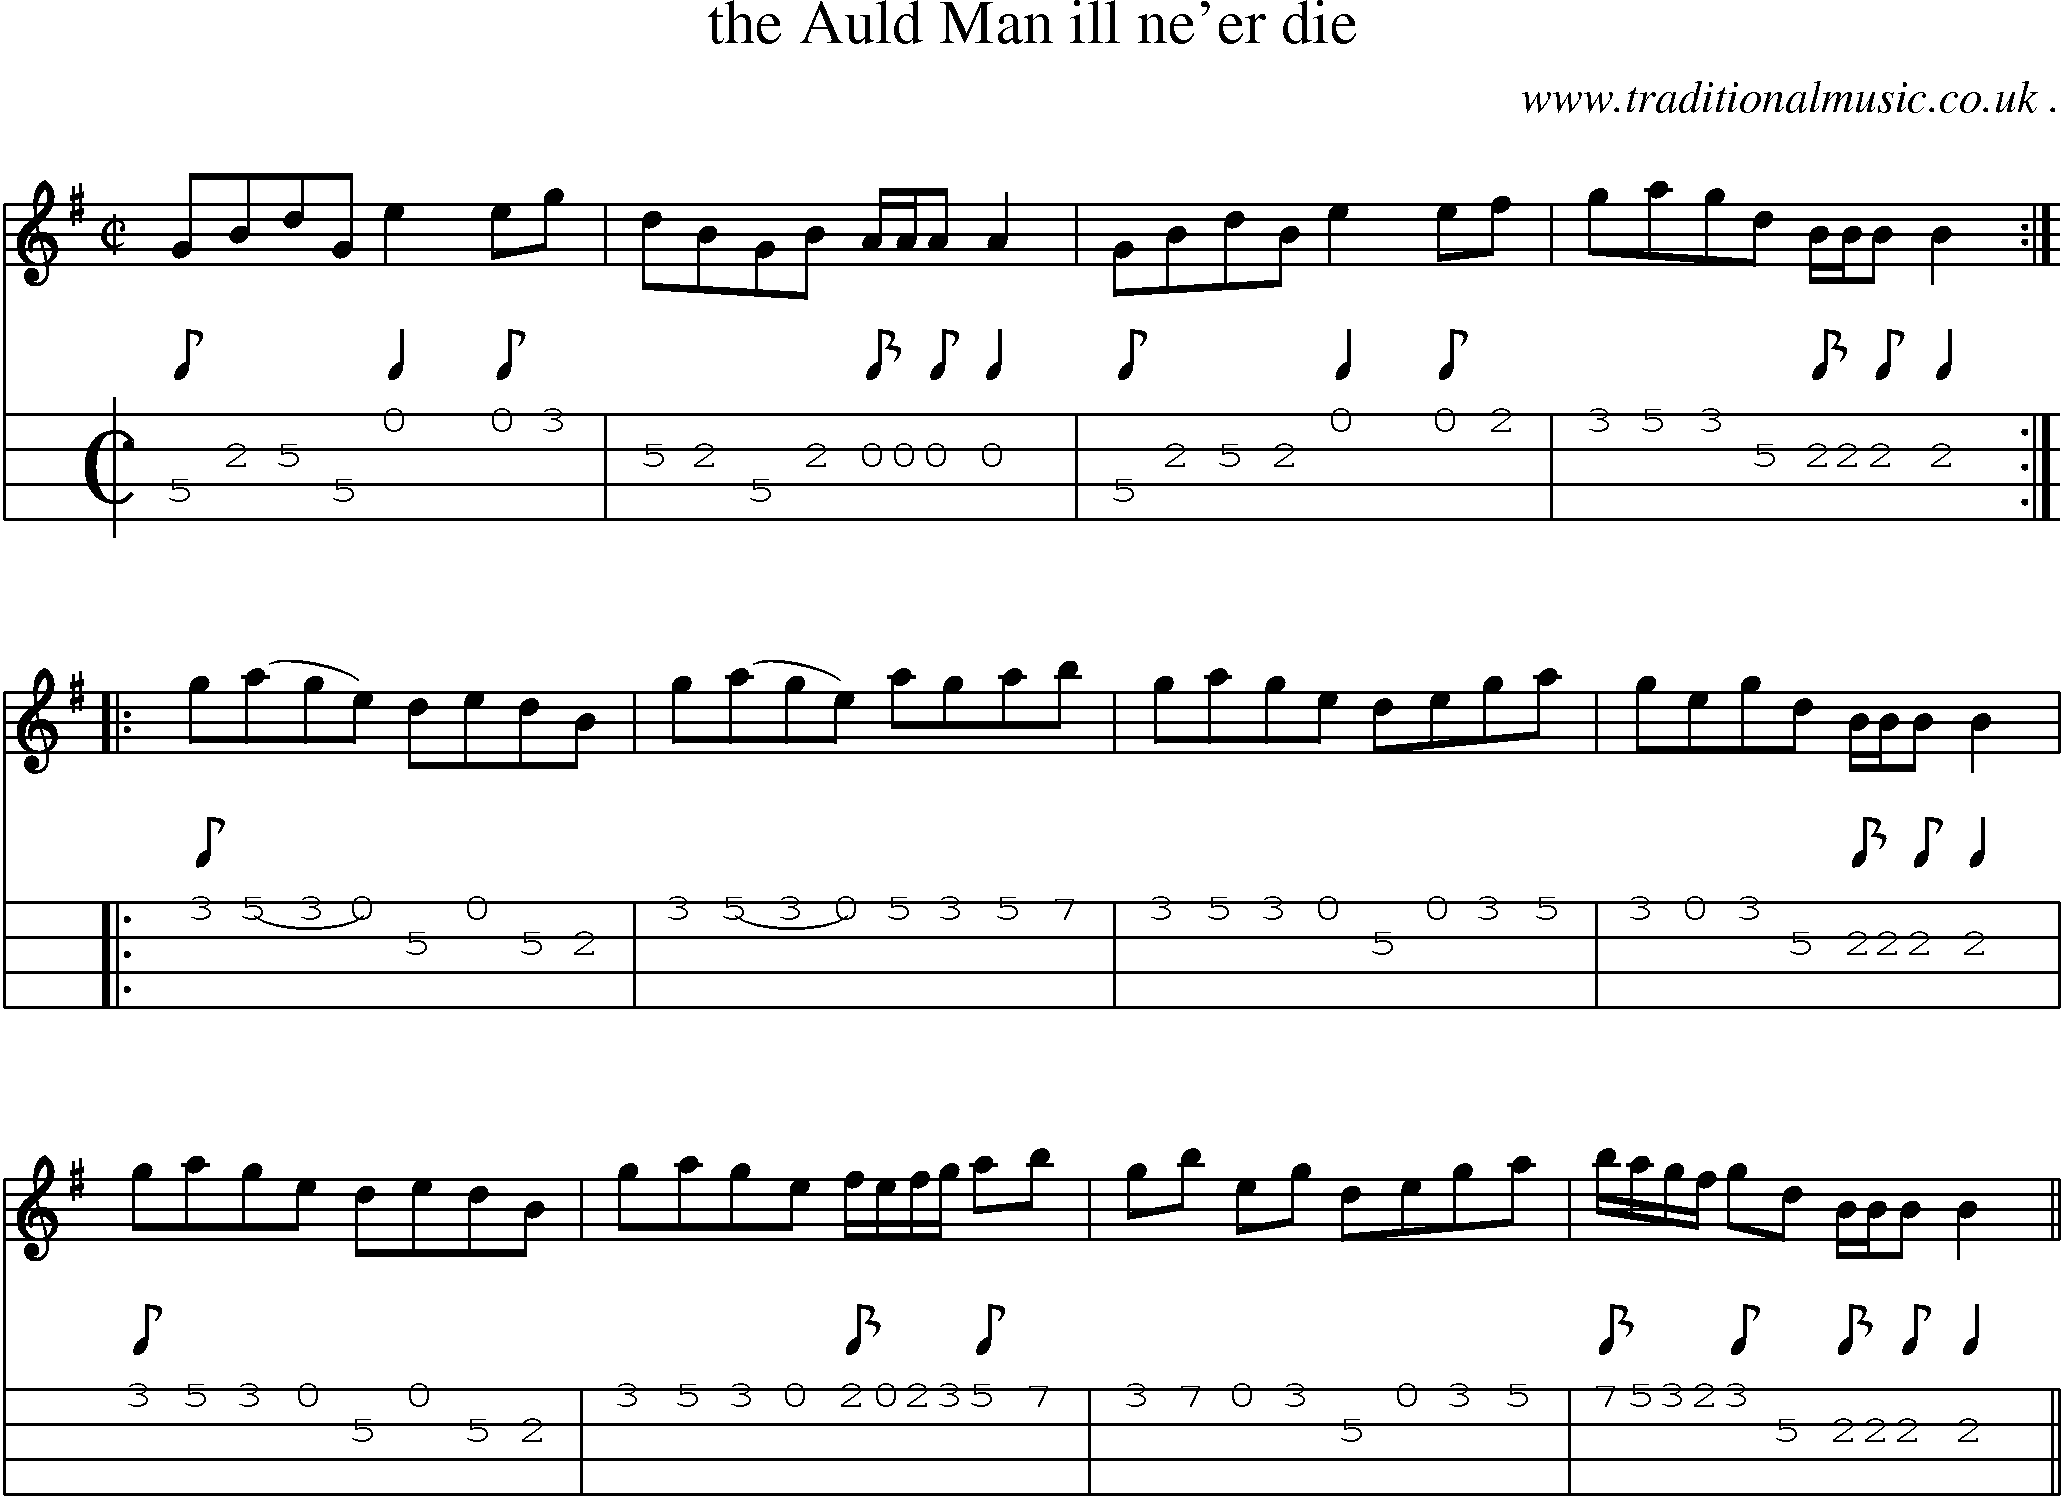 Sheet-Music and Mandolin Tabs for The Auld Man Ill Neer Die